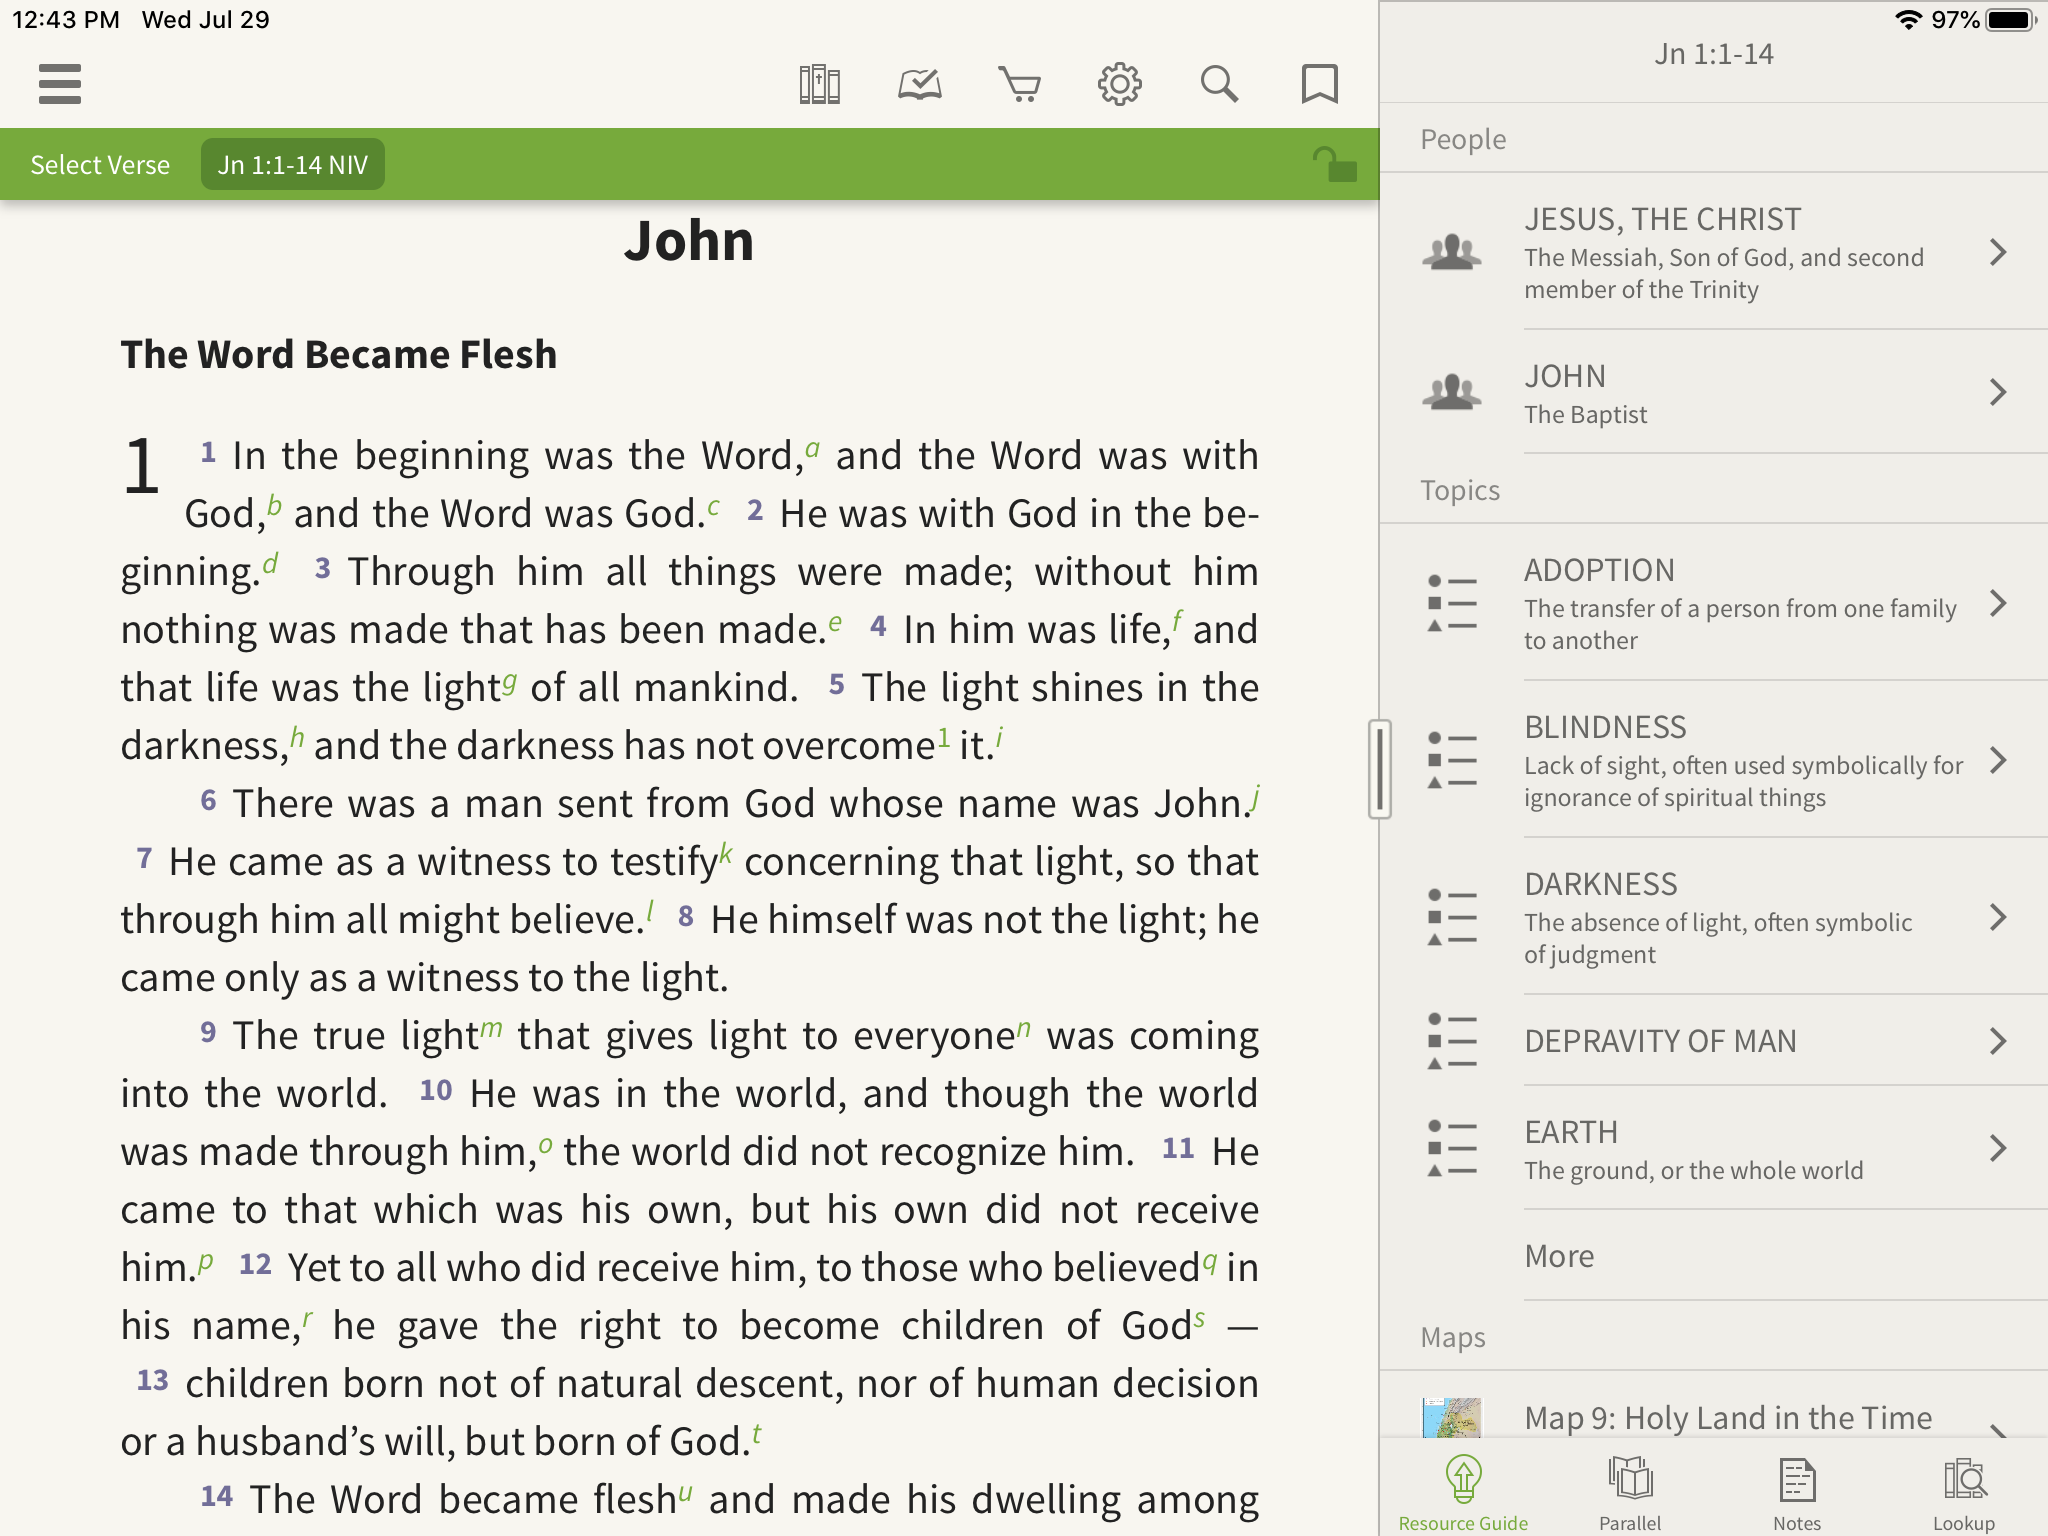 opening people, topics, and places in the olive tree bible app